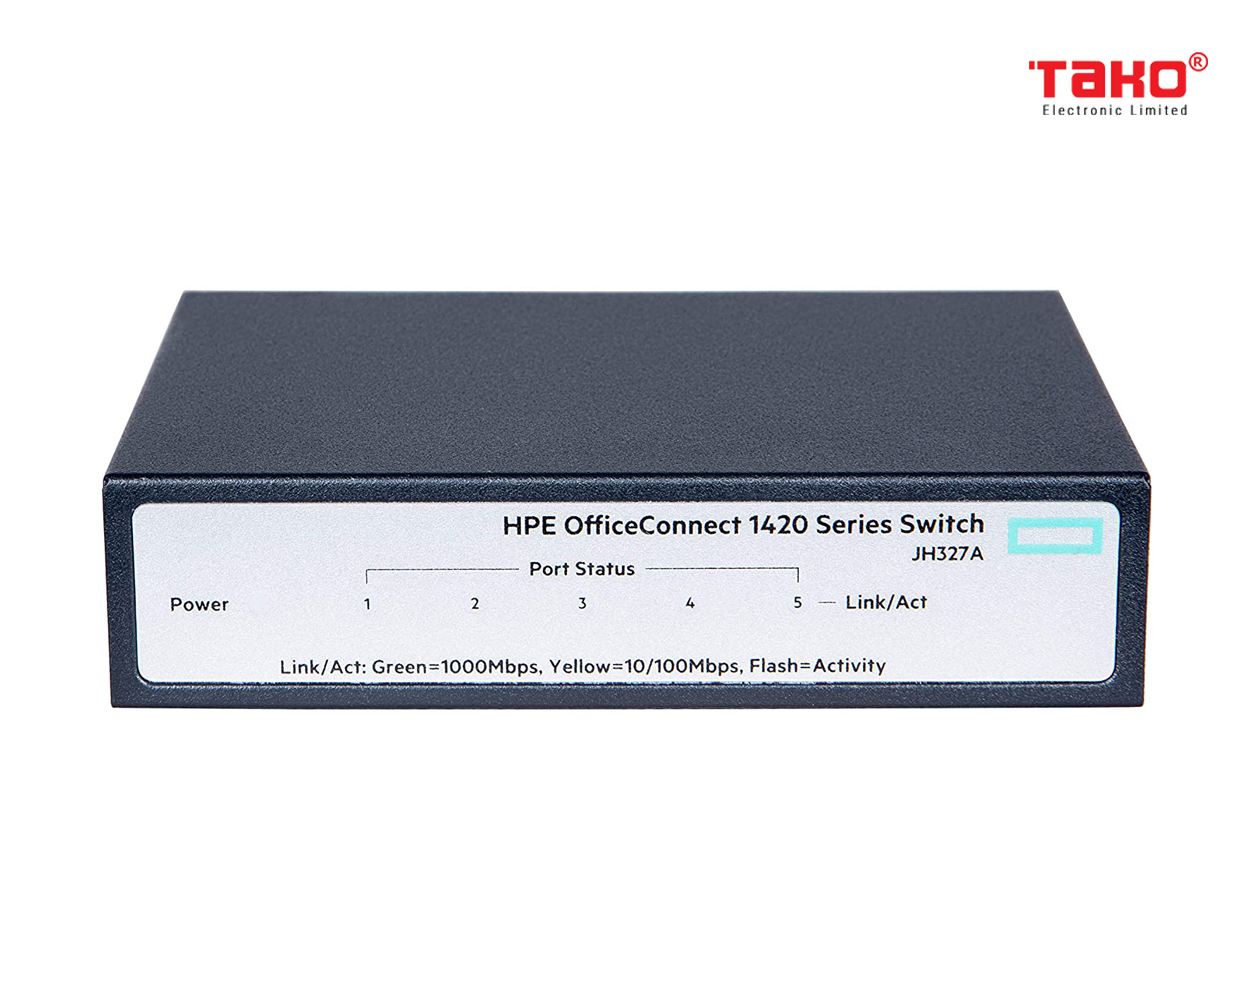 HPE OfficeConnect 1420 5-Port Gigabit Ethernet Unmanaged Switch-5 x GE 10/100/1000 (JH327A#ABA) 1